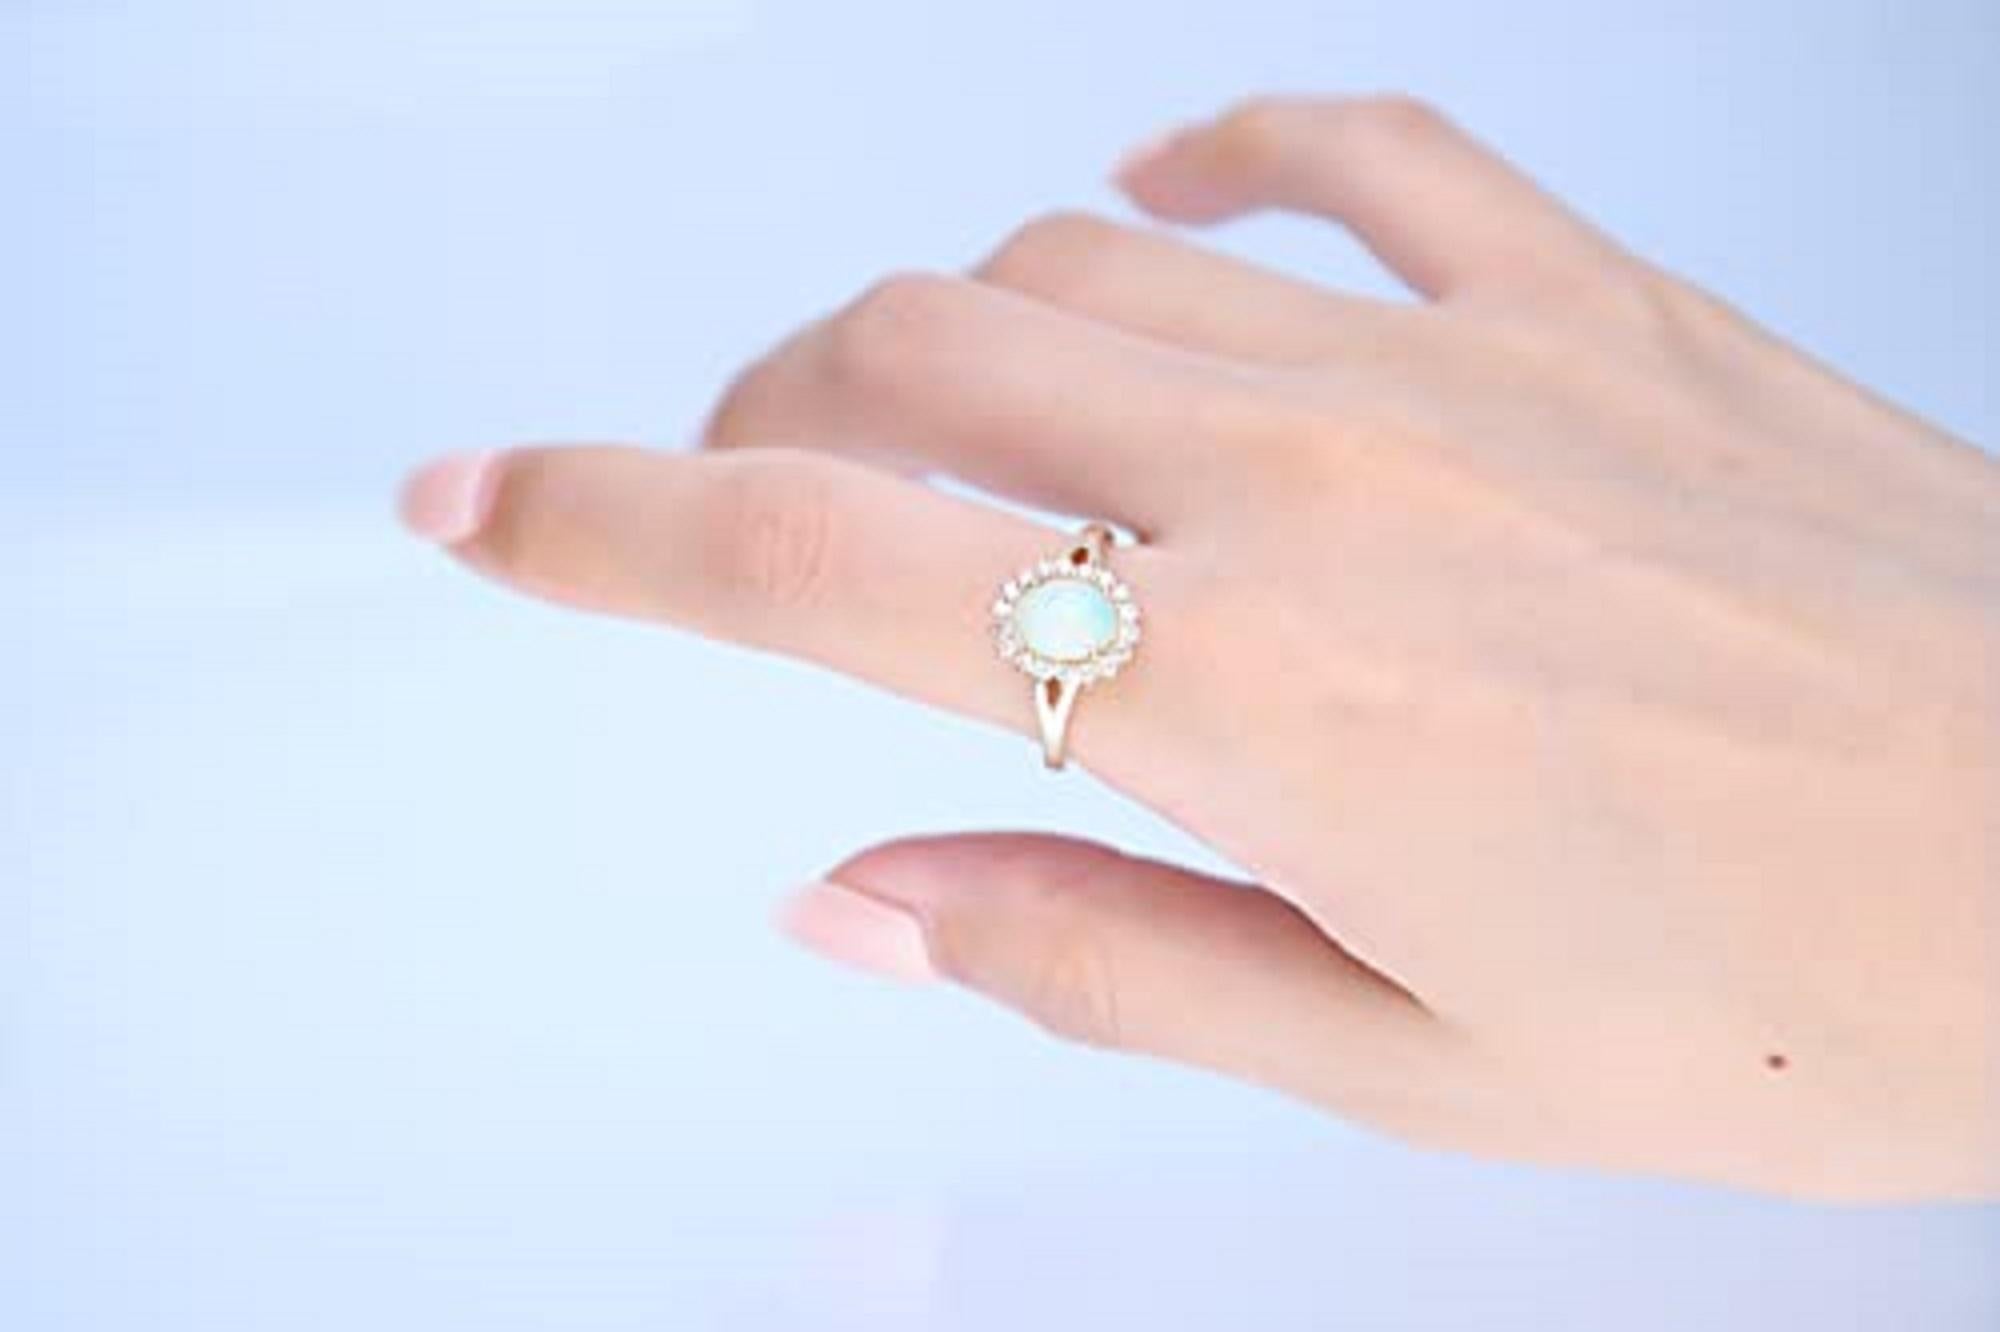 Show your stately taste in jewelry with this Natural opal and diamond ring from Gin & Grace The 14-karat yellow gold band complements the opal, which reflects multiple colors to match any outfit. With 18 round-cut diamonds surrounding the opal, the